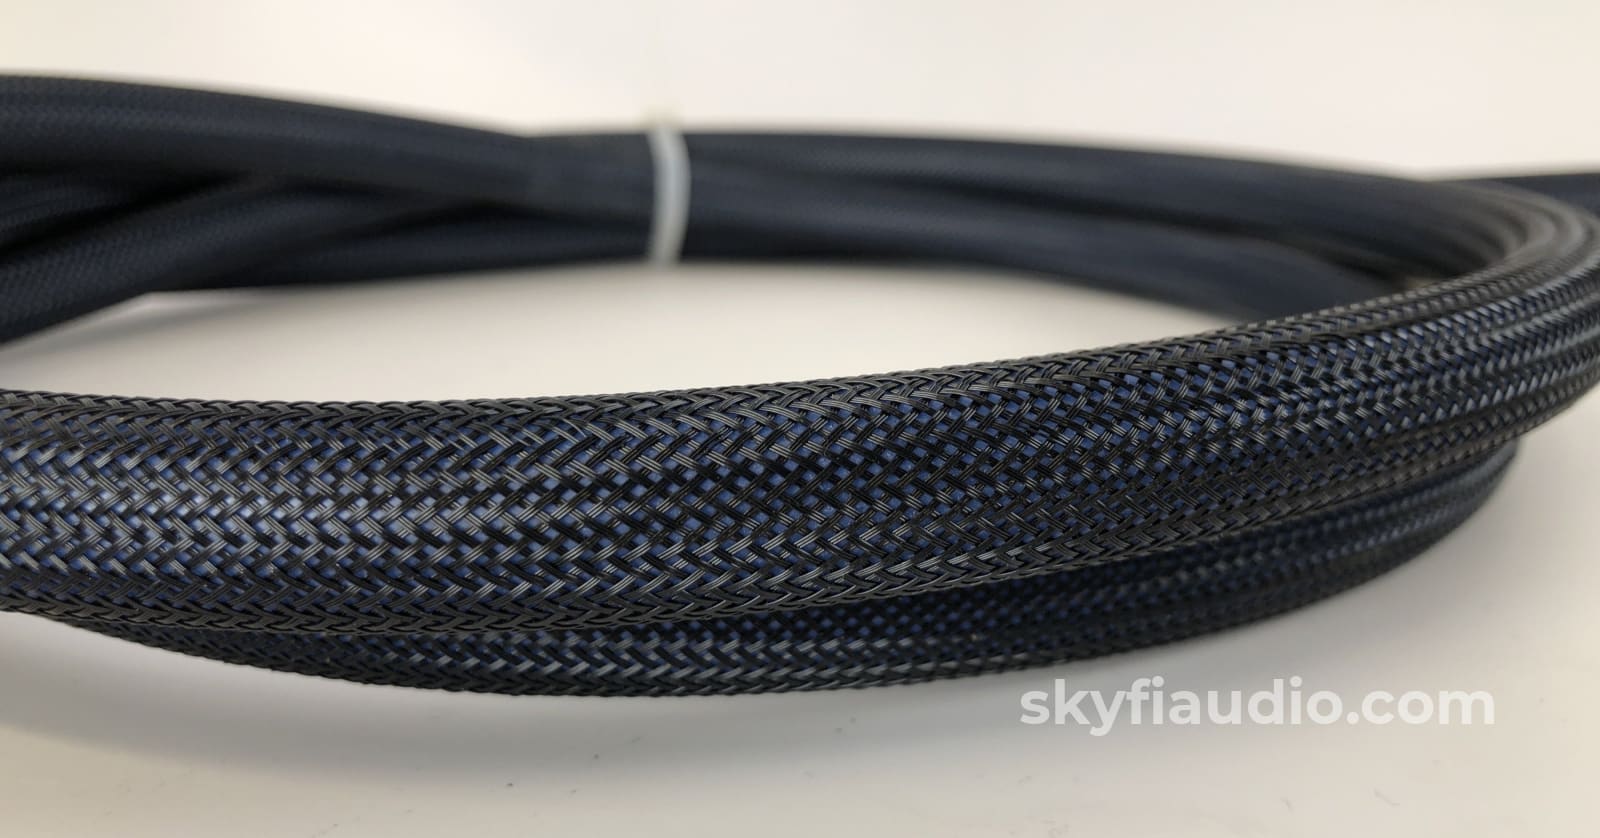 Siltech Cables - Forbes Lake Xlr Audio Cable With Satt Upgrade 2M